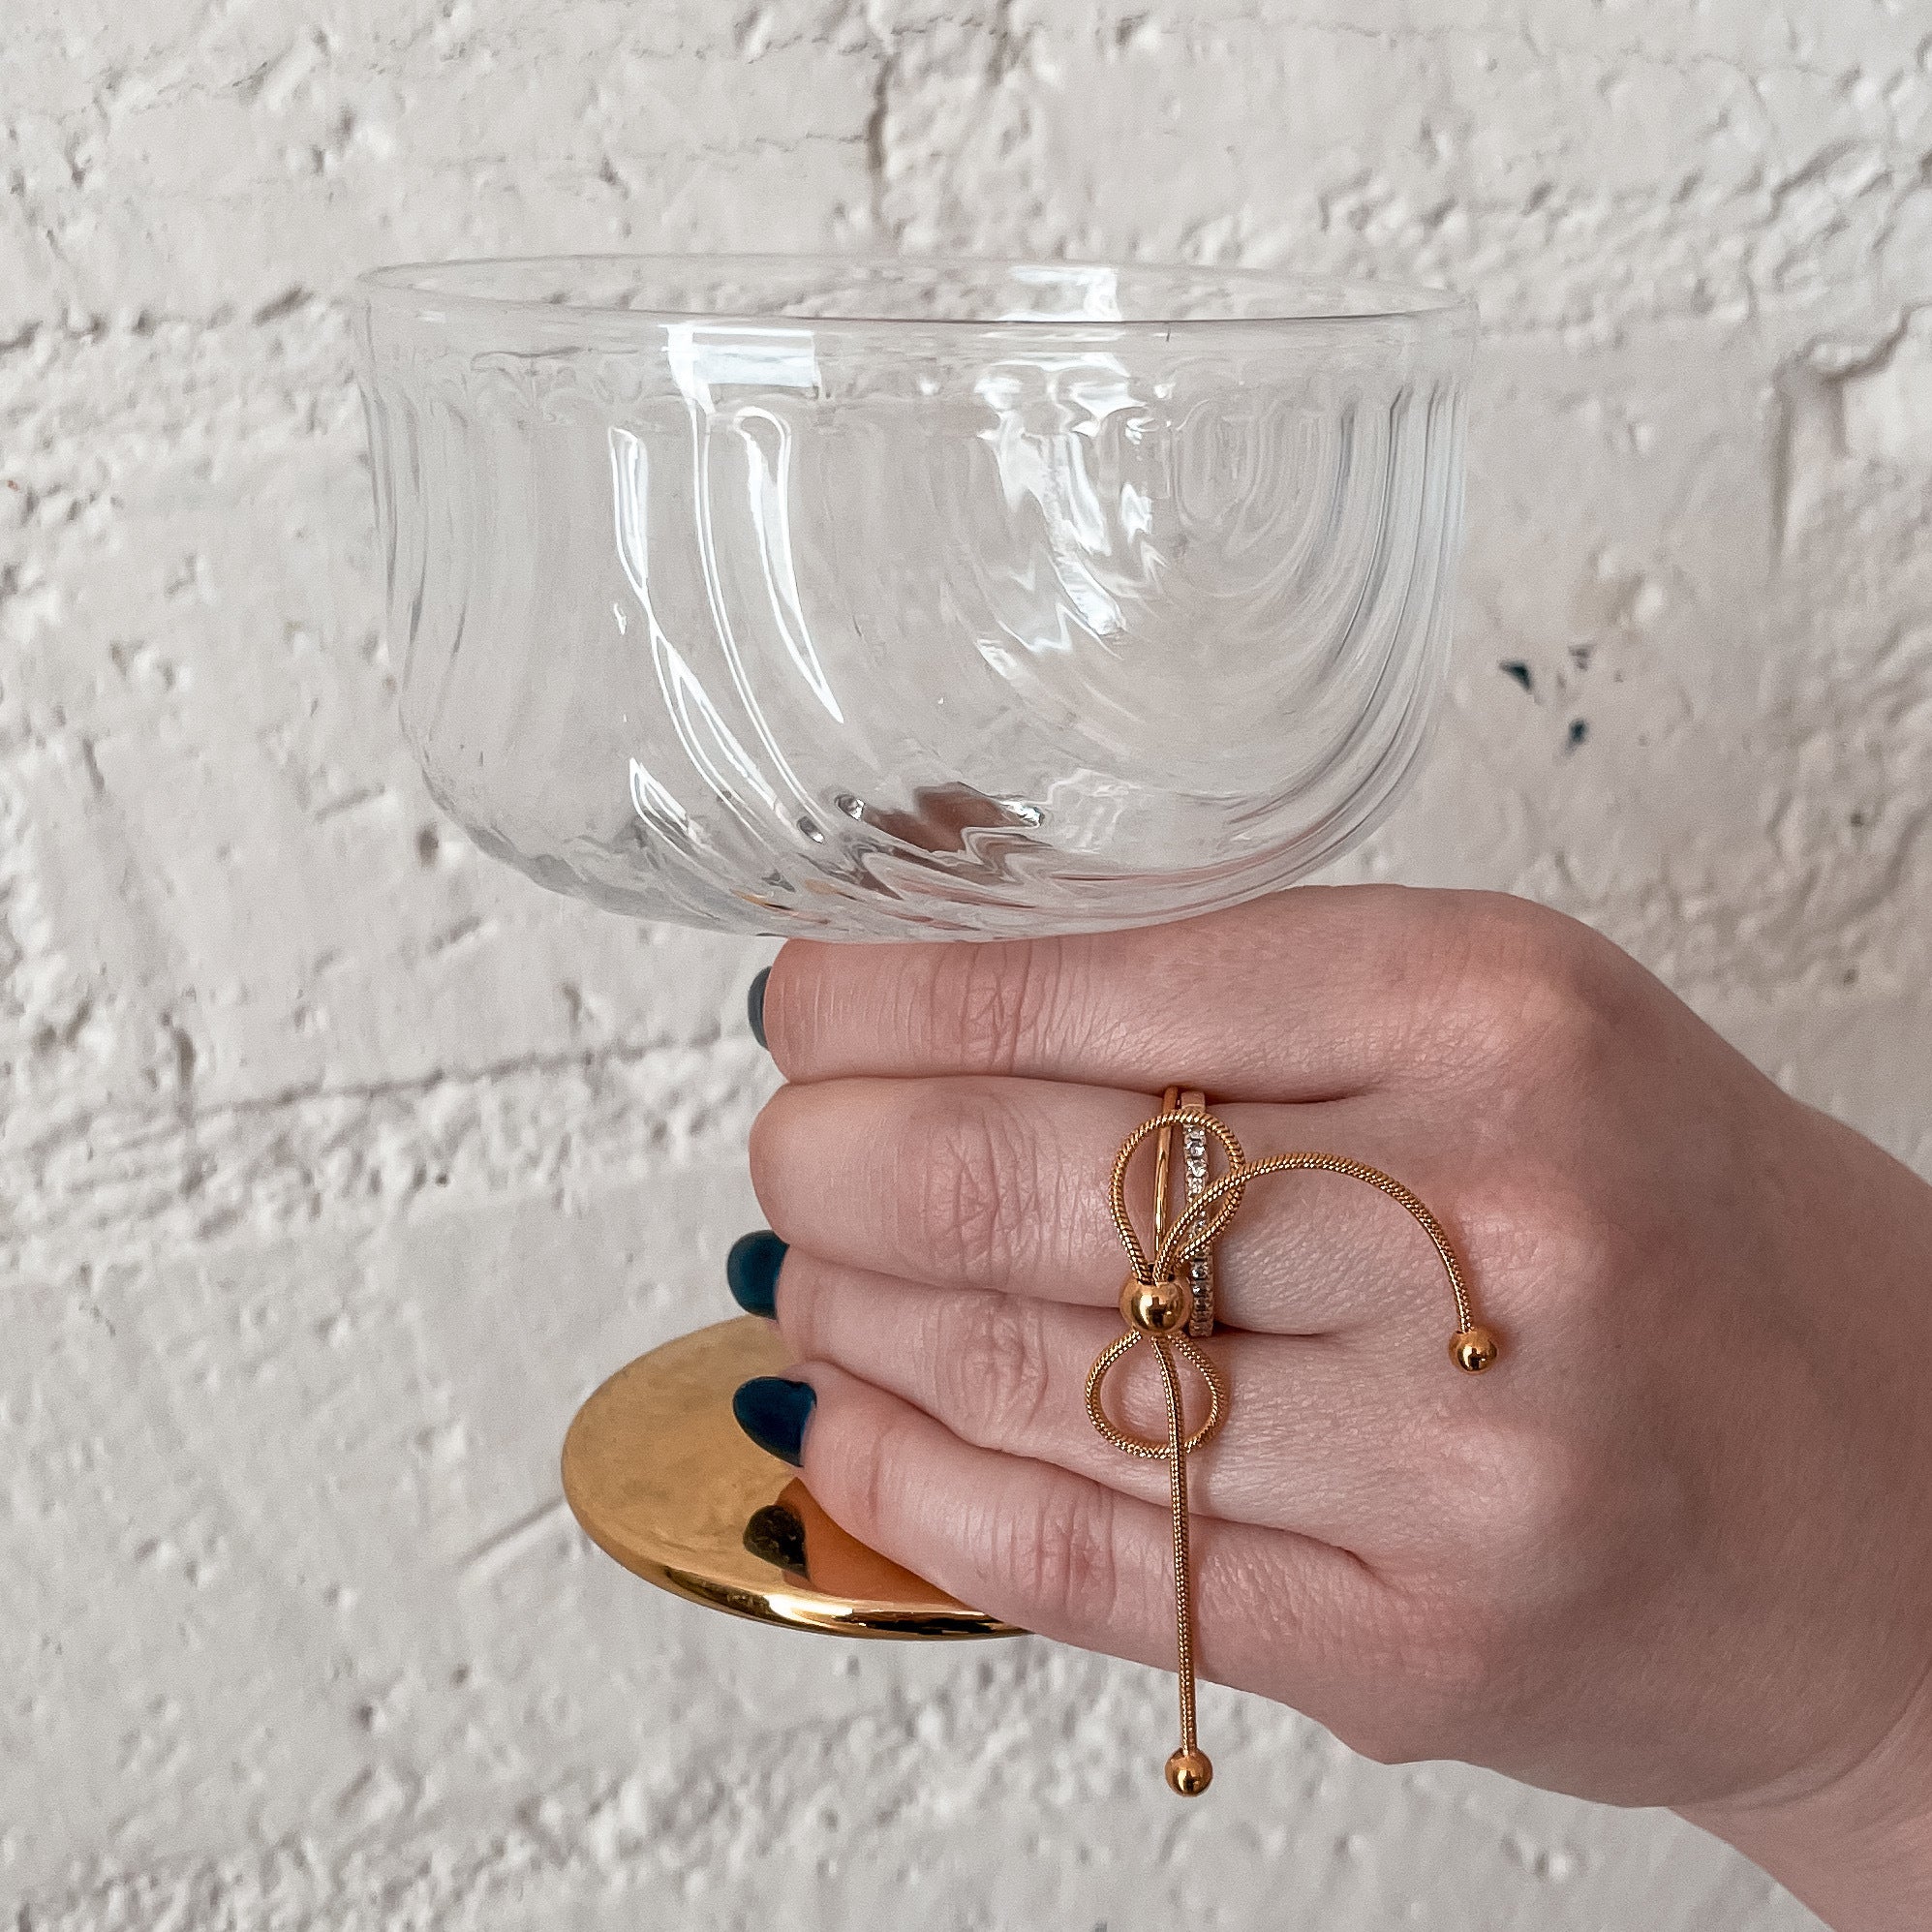 Gold bow ring on hand holding champagne coupe